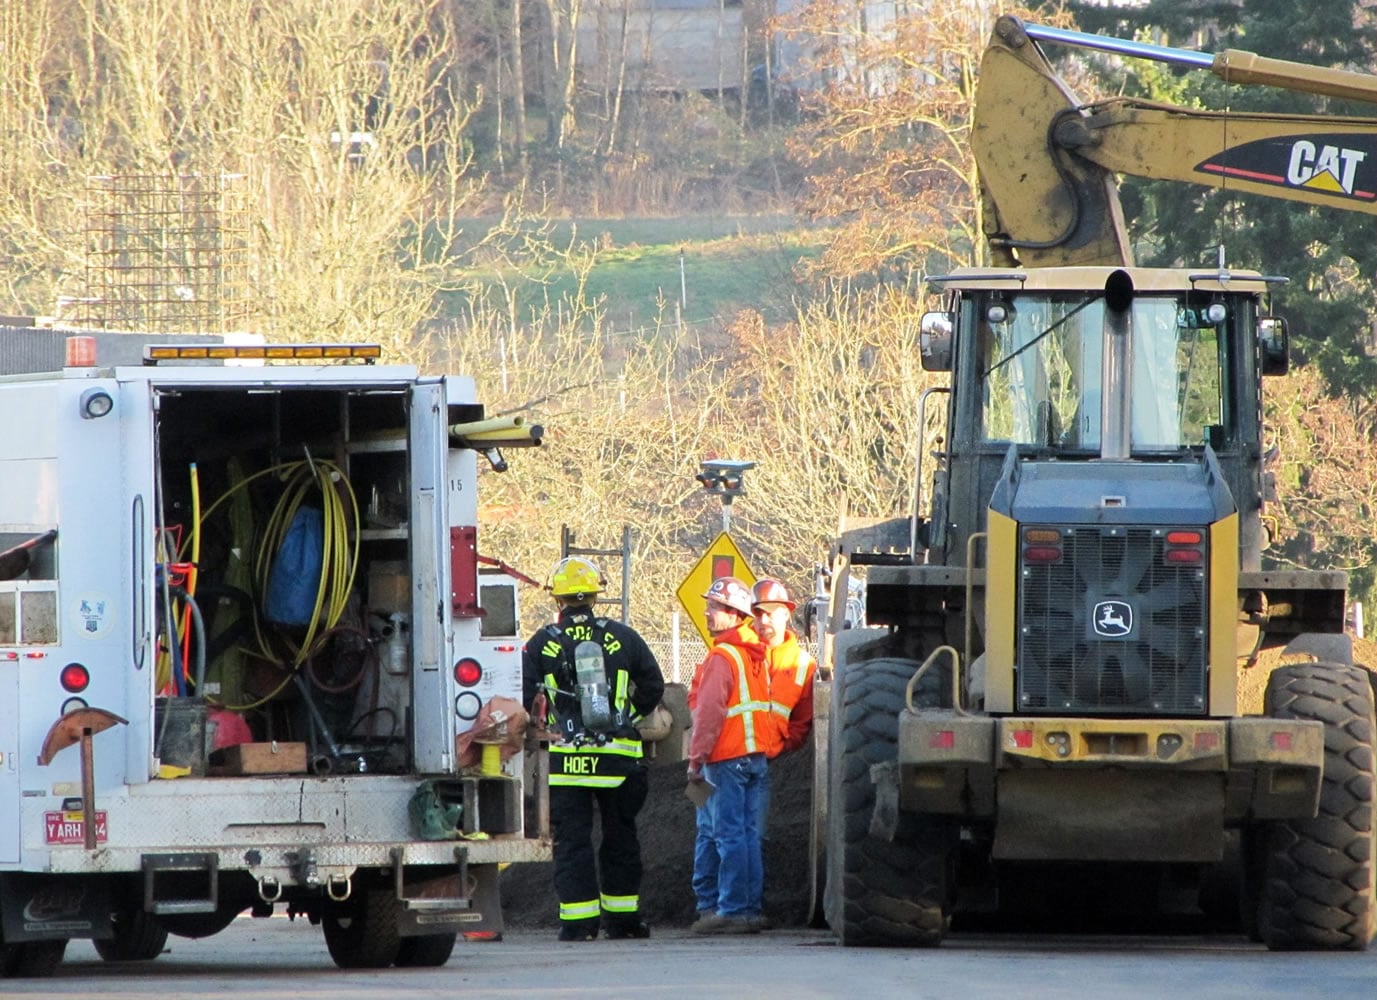 Firefighters with Vancouver Fire Department responded to a reported gas leak near state Highway 500 around 7:30 a.m. Friday.